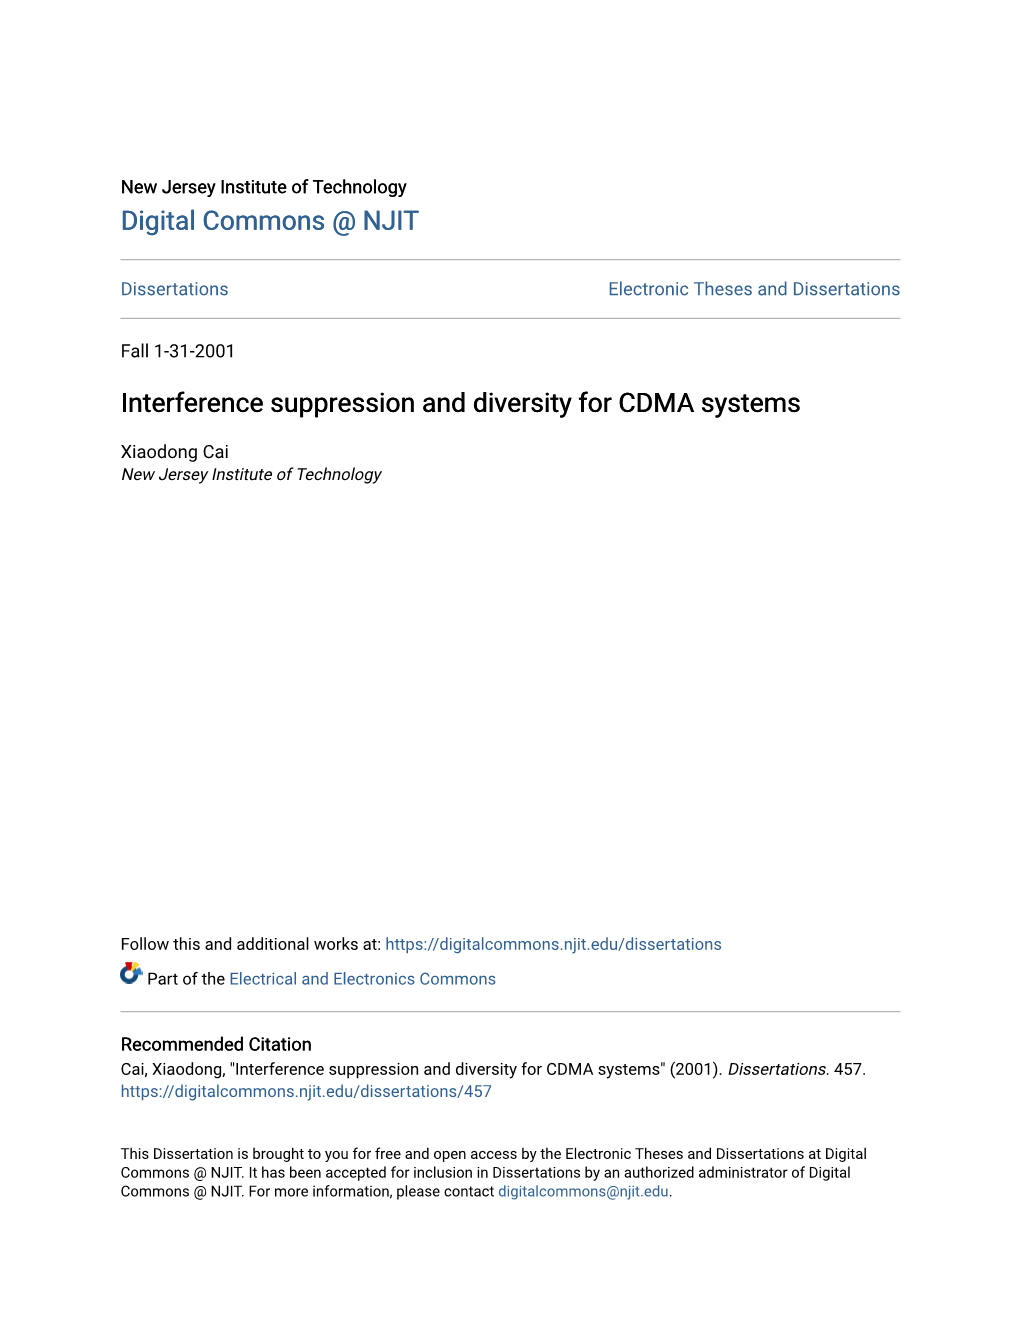 Interference Suppression and Diversity for CDMA Systems